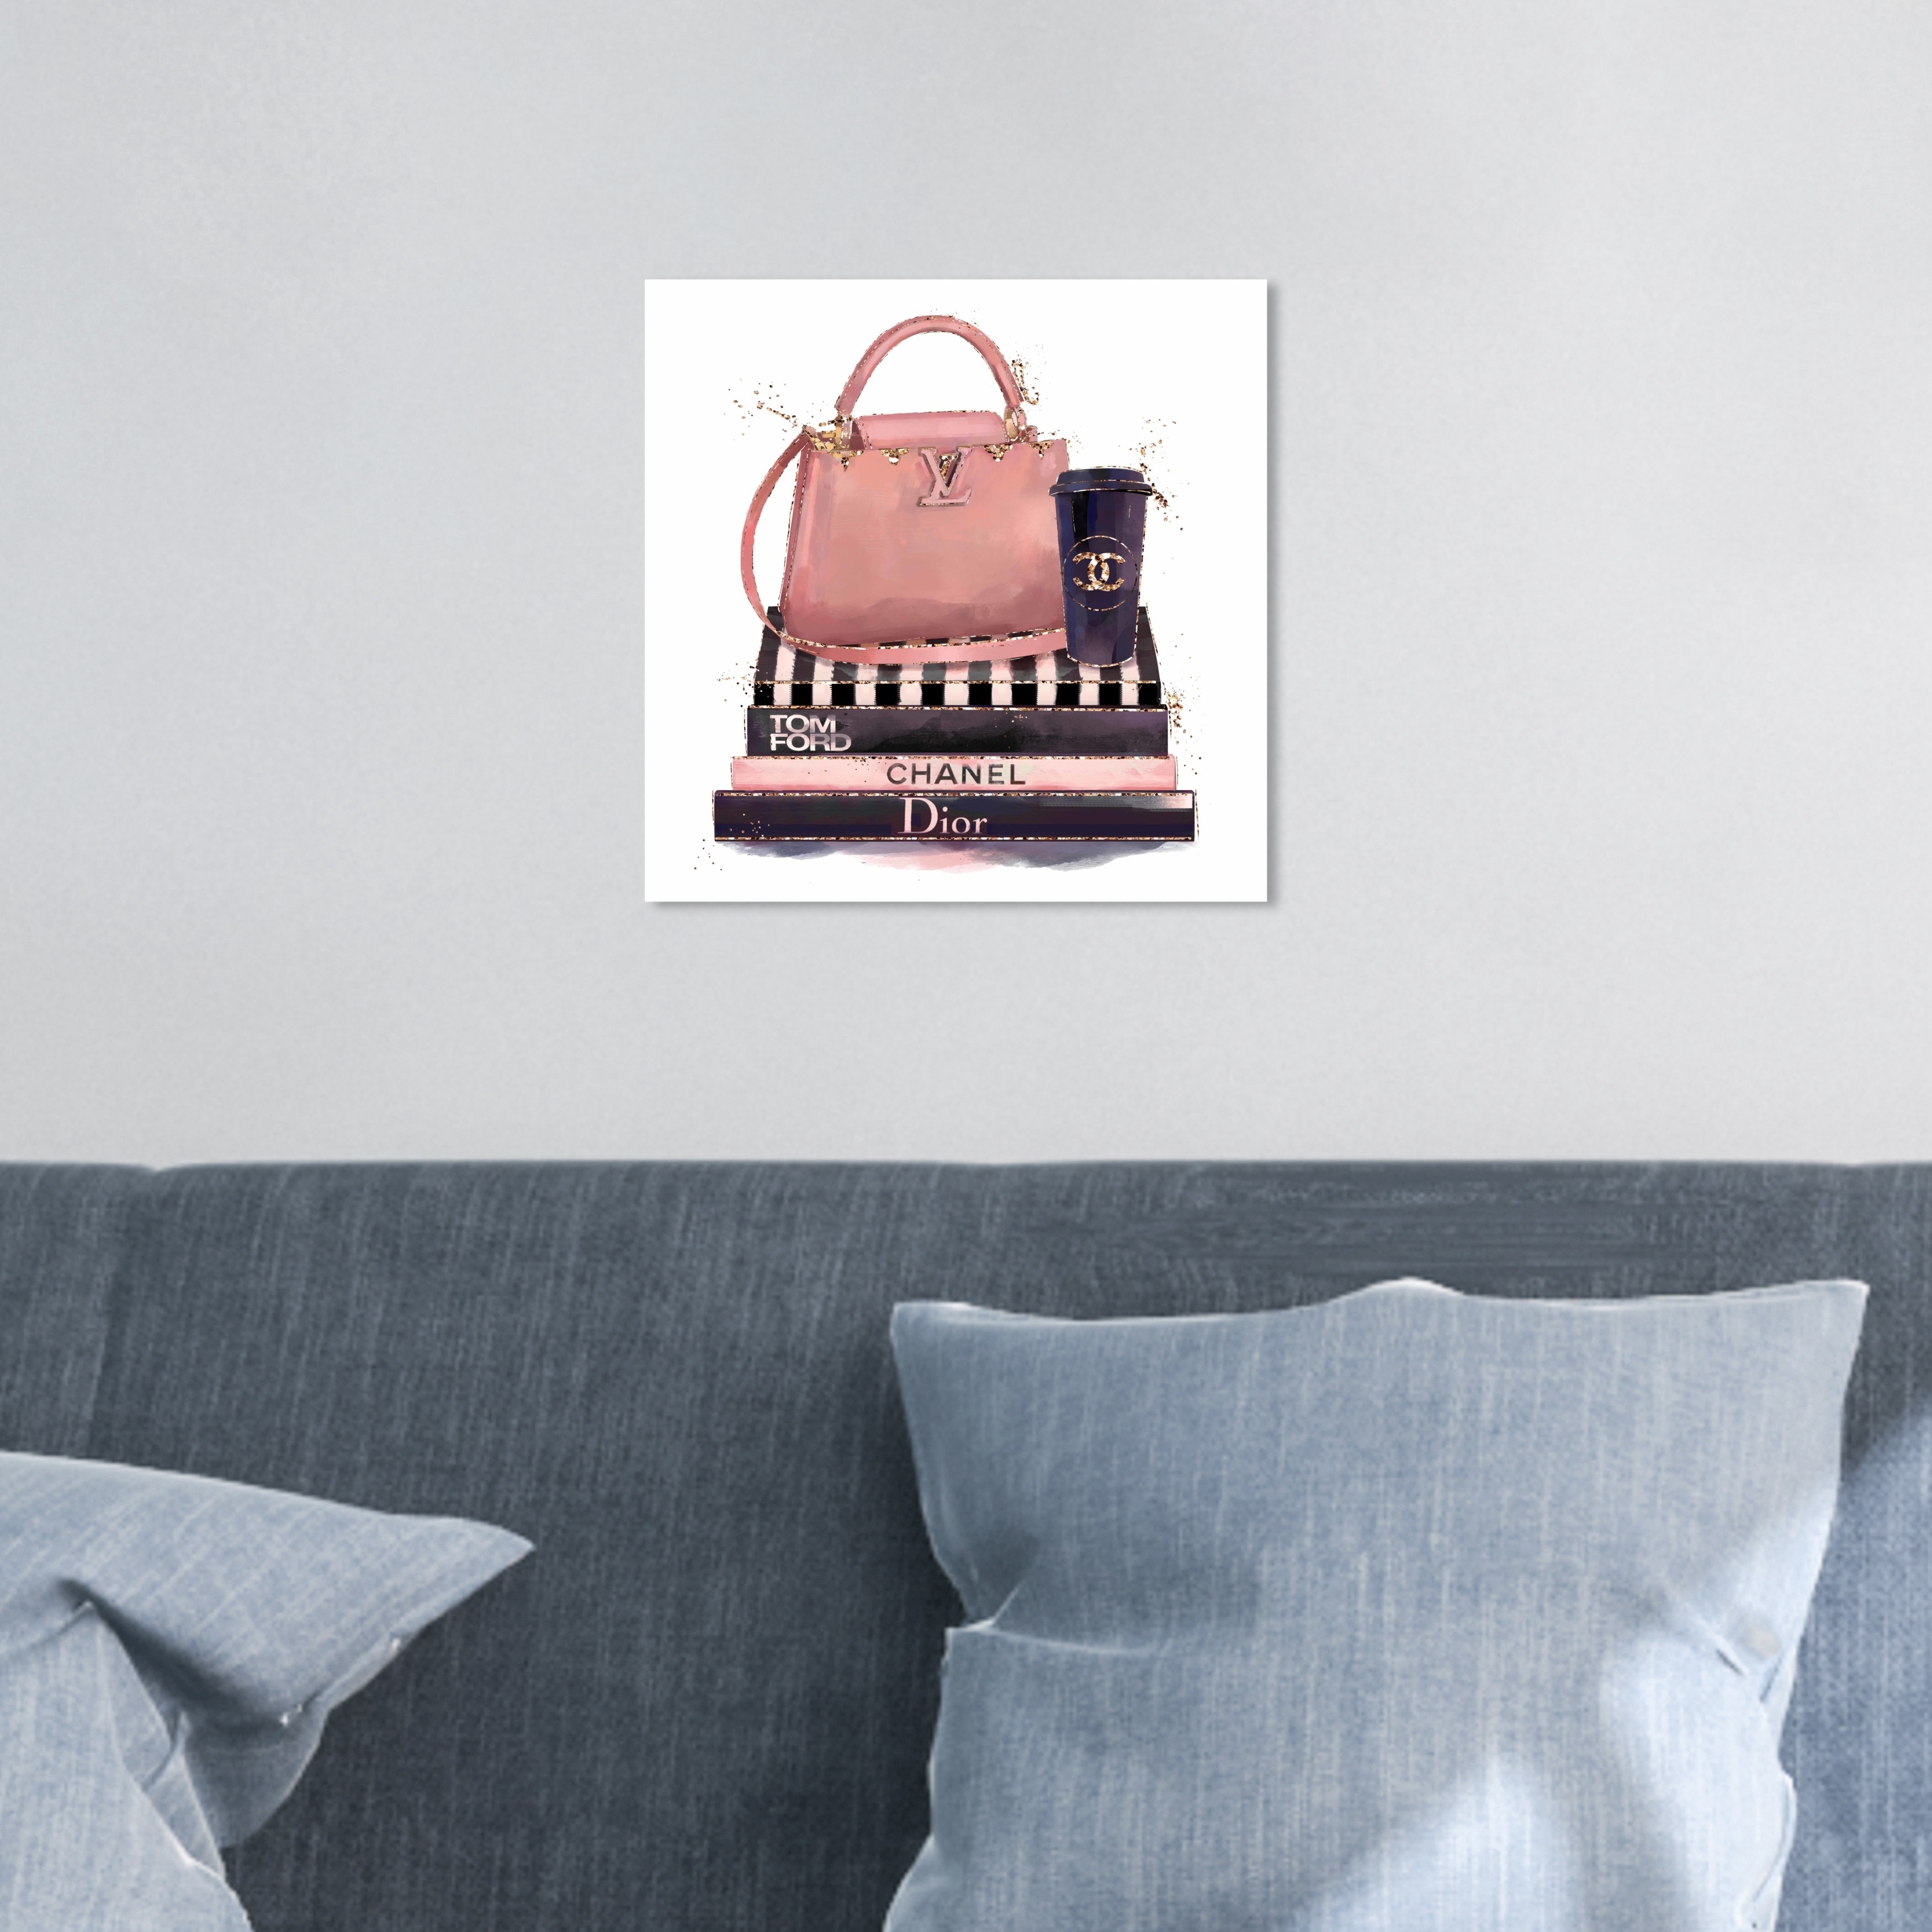  The Oliver Gal Artist Co. Fashion and Glam Wall Art Canvas  Prints '29597 Treasured Handbag' Home Décor, 30 x 30, Pink, Black:  Posters & Prints